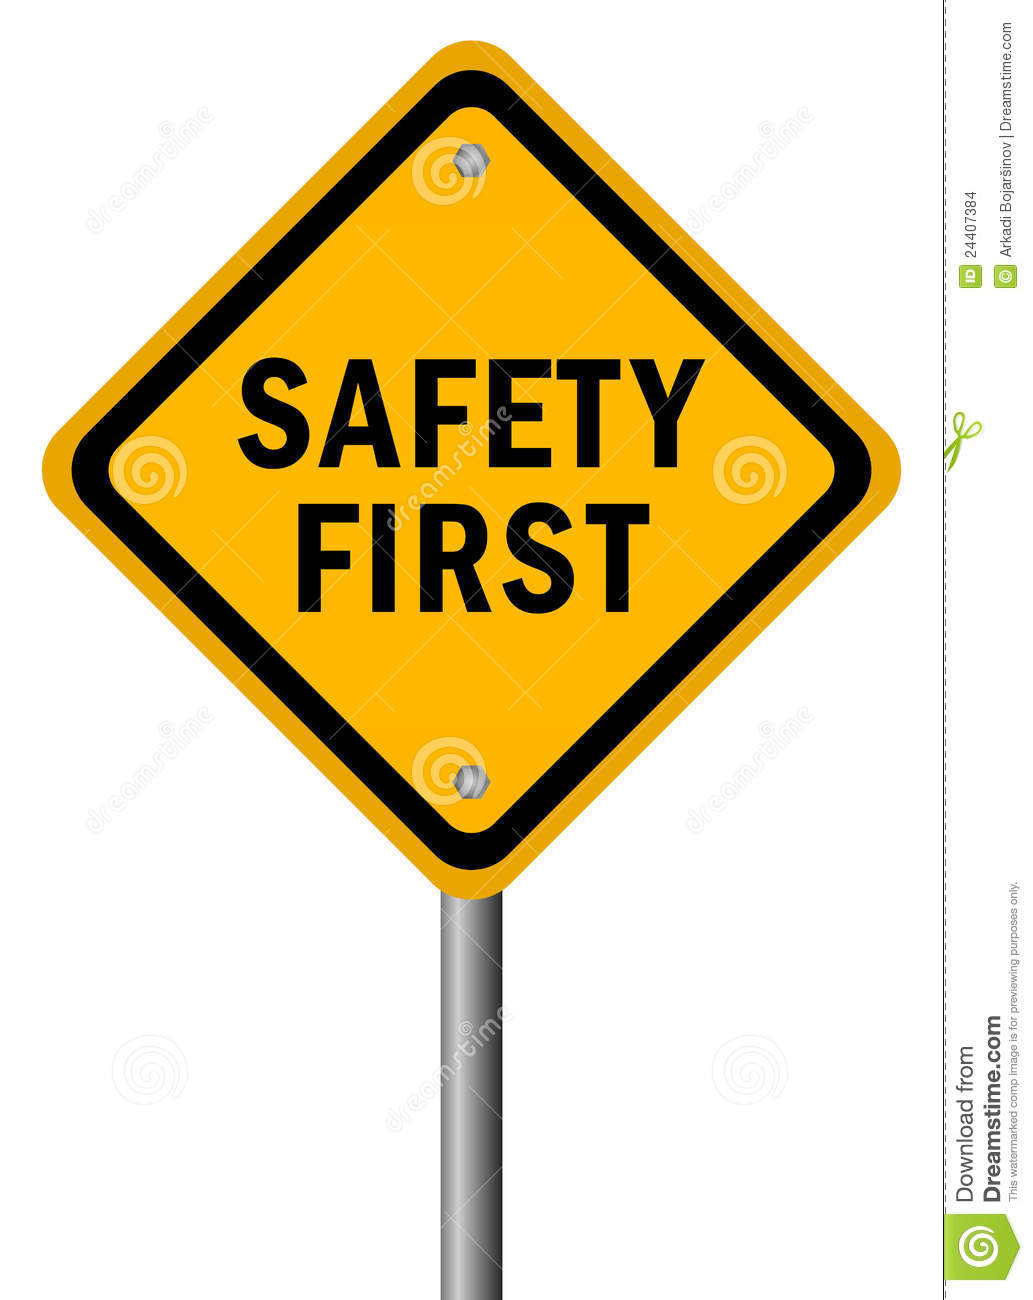 Safety First Clipart Safety . - Safety Images Clip Art